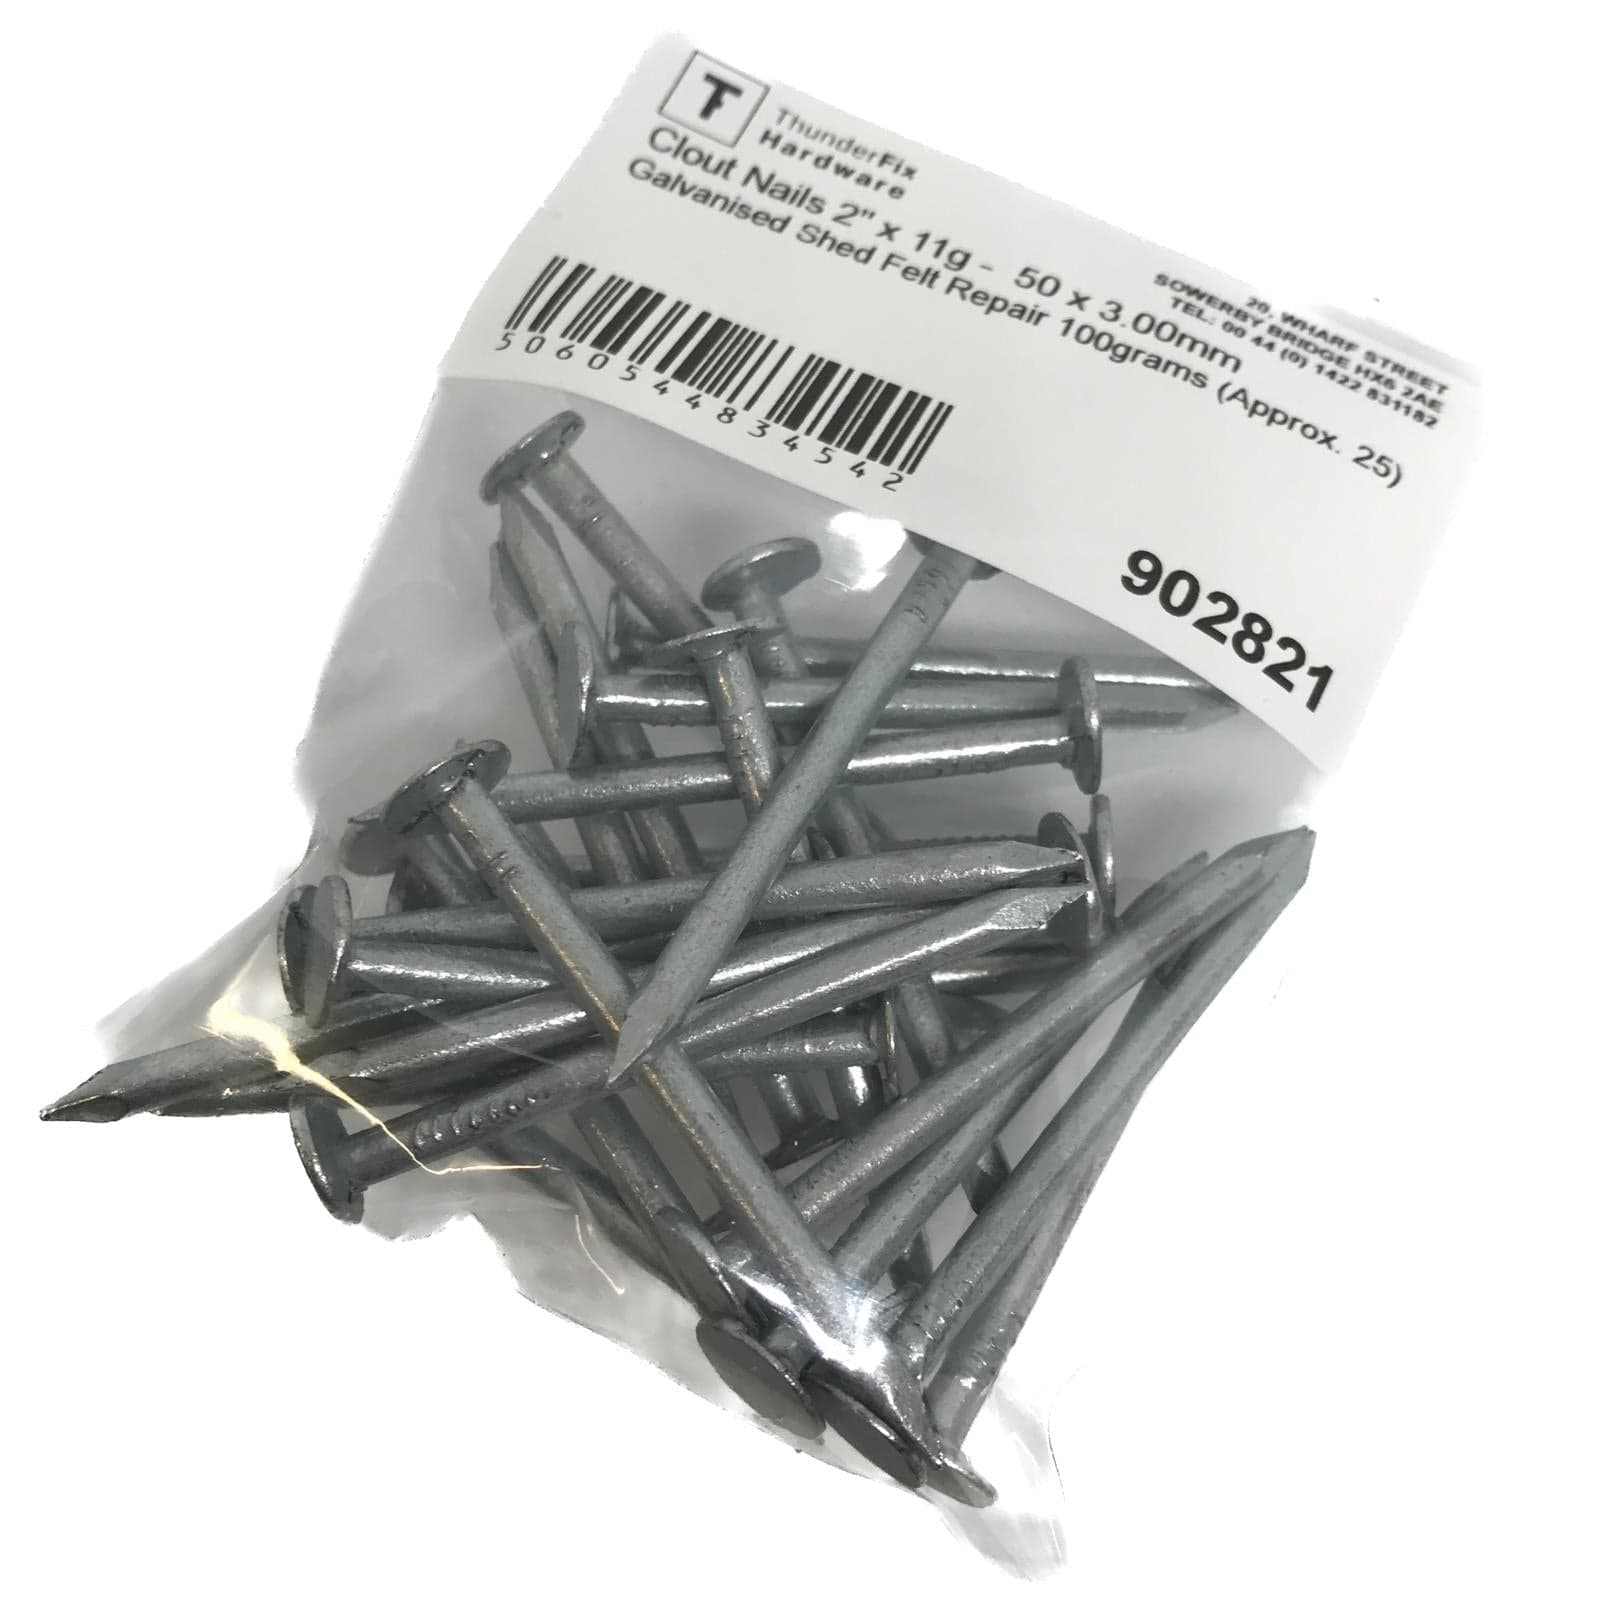 Clout Nails 2" x 11g -  50 x 3.00mm Galvanised Shed Felt Repair 100grams (Approx. 25) Service Item Thunderfix 902821